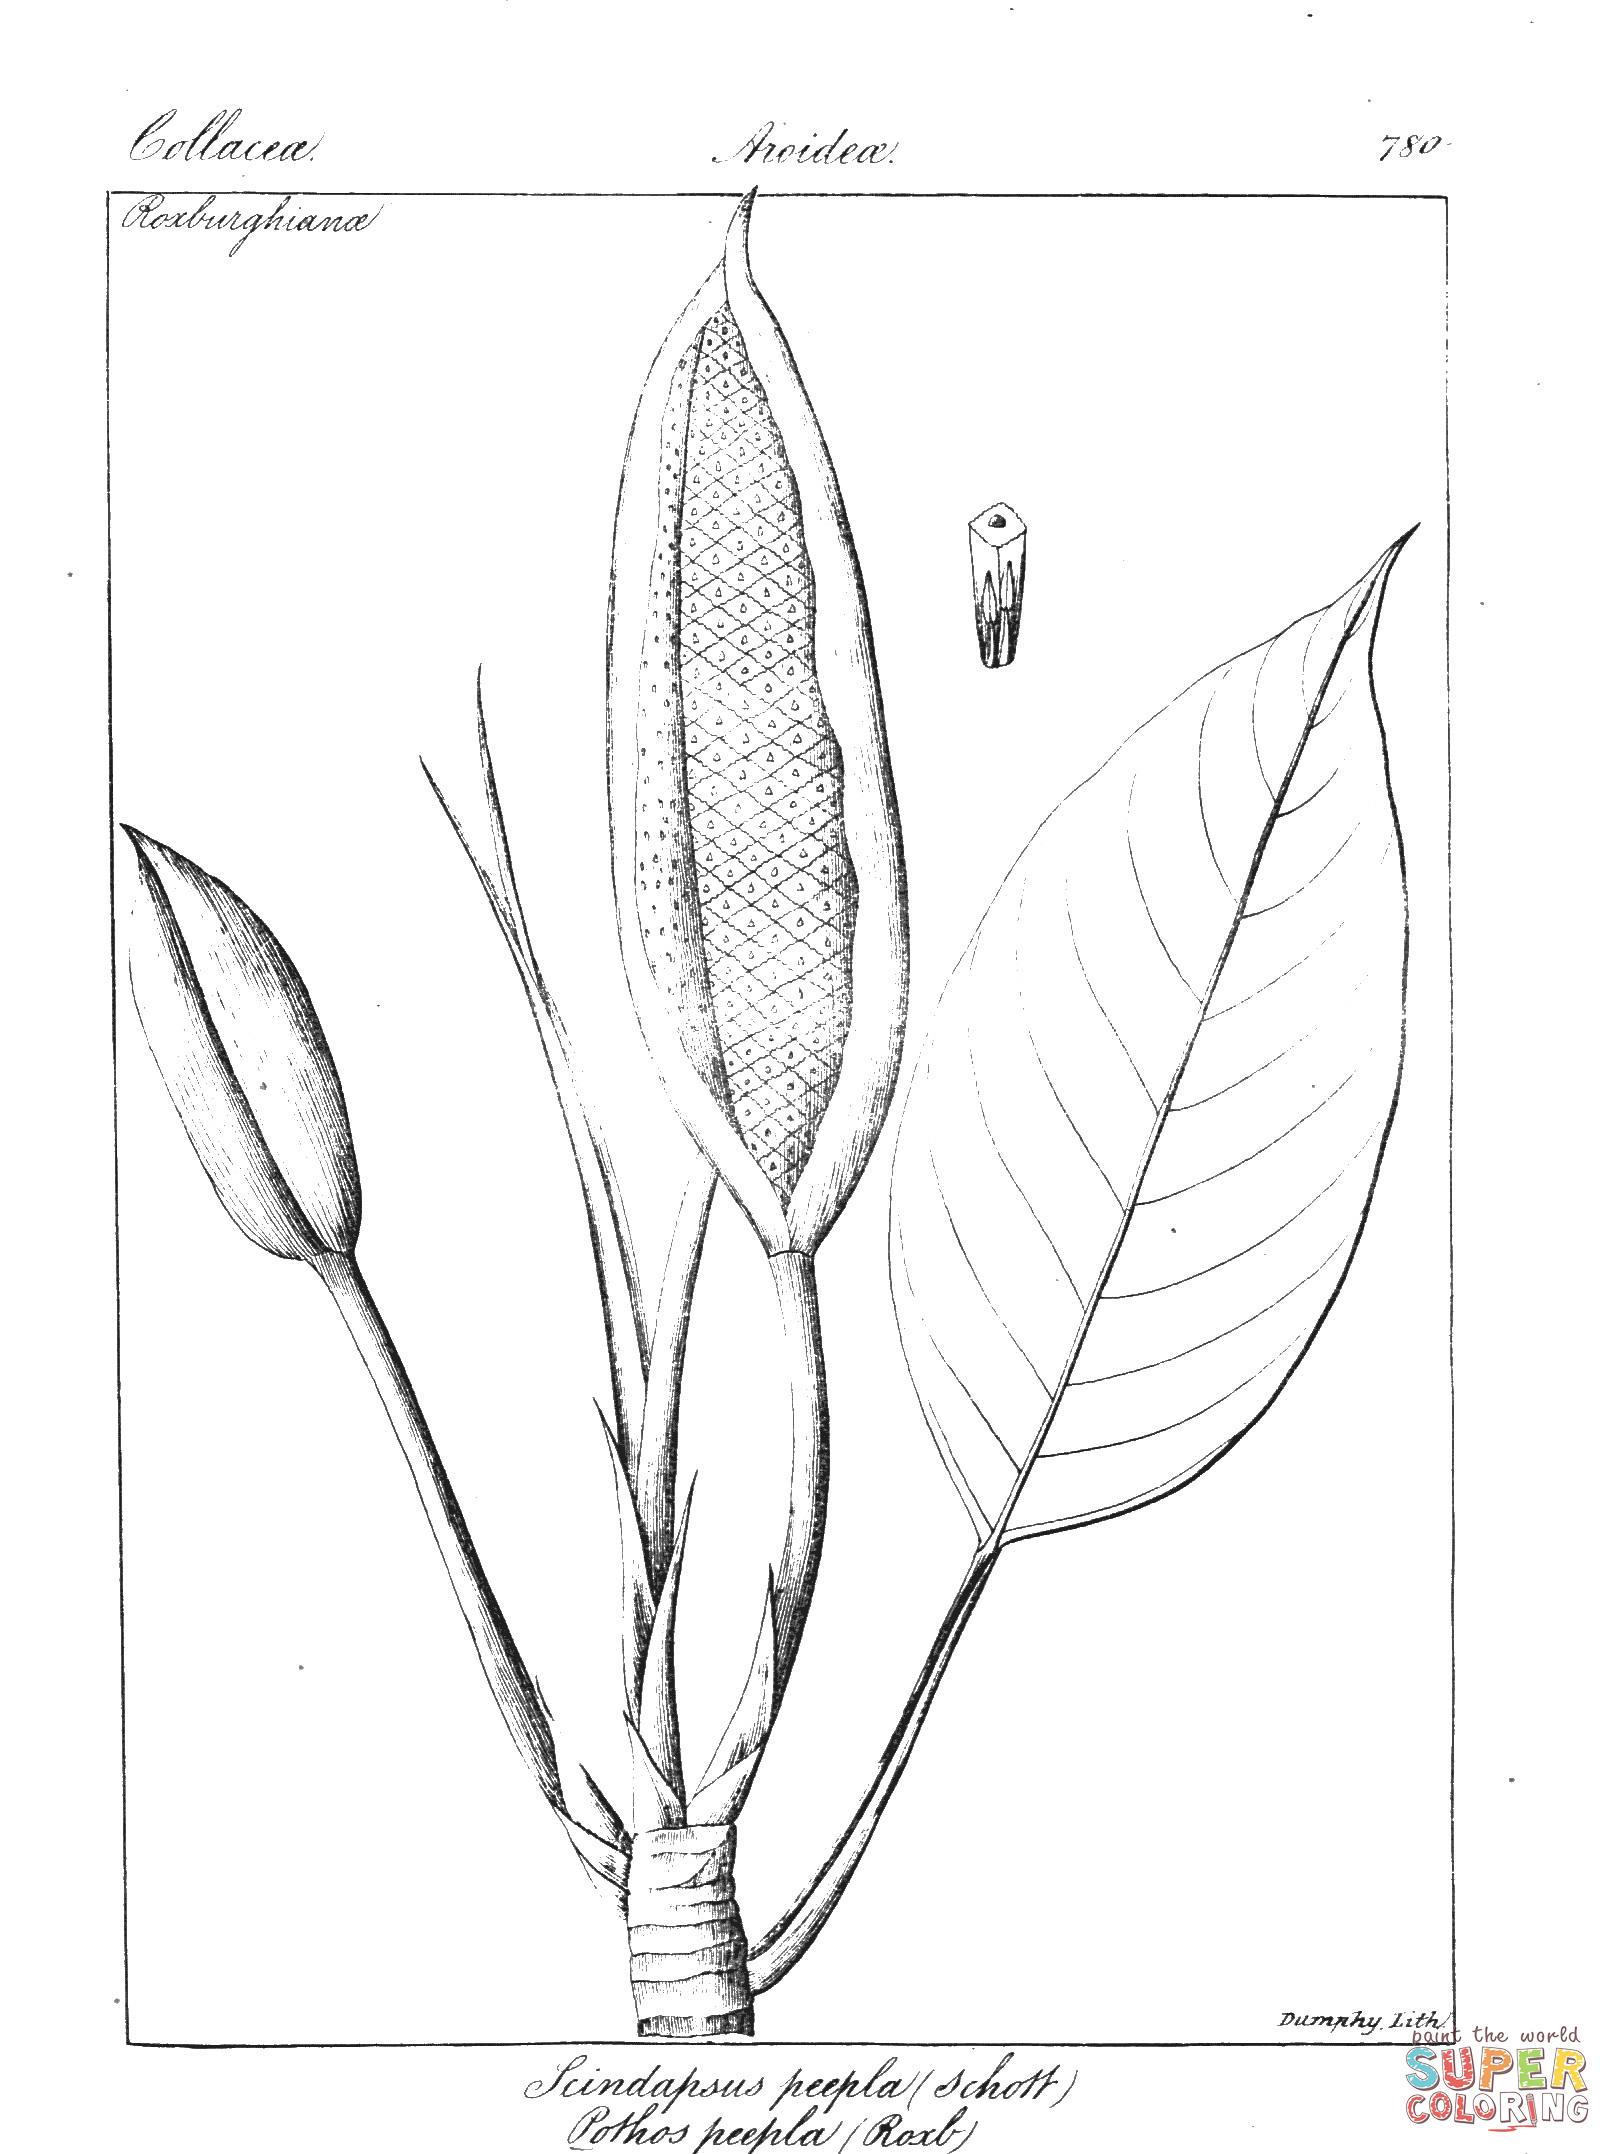 Scindapsus peepla and pothos peepla coloring page free printable coloring pages